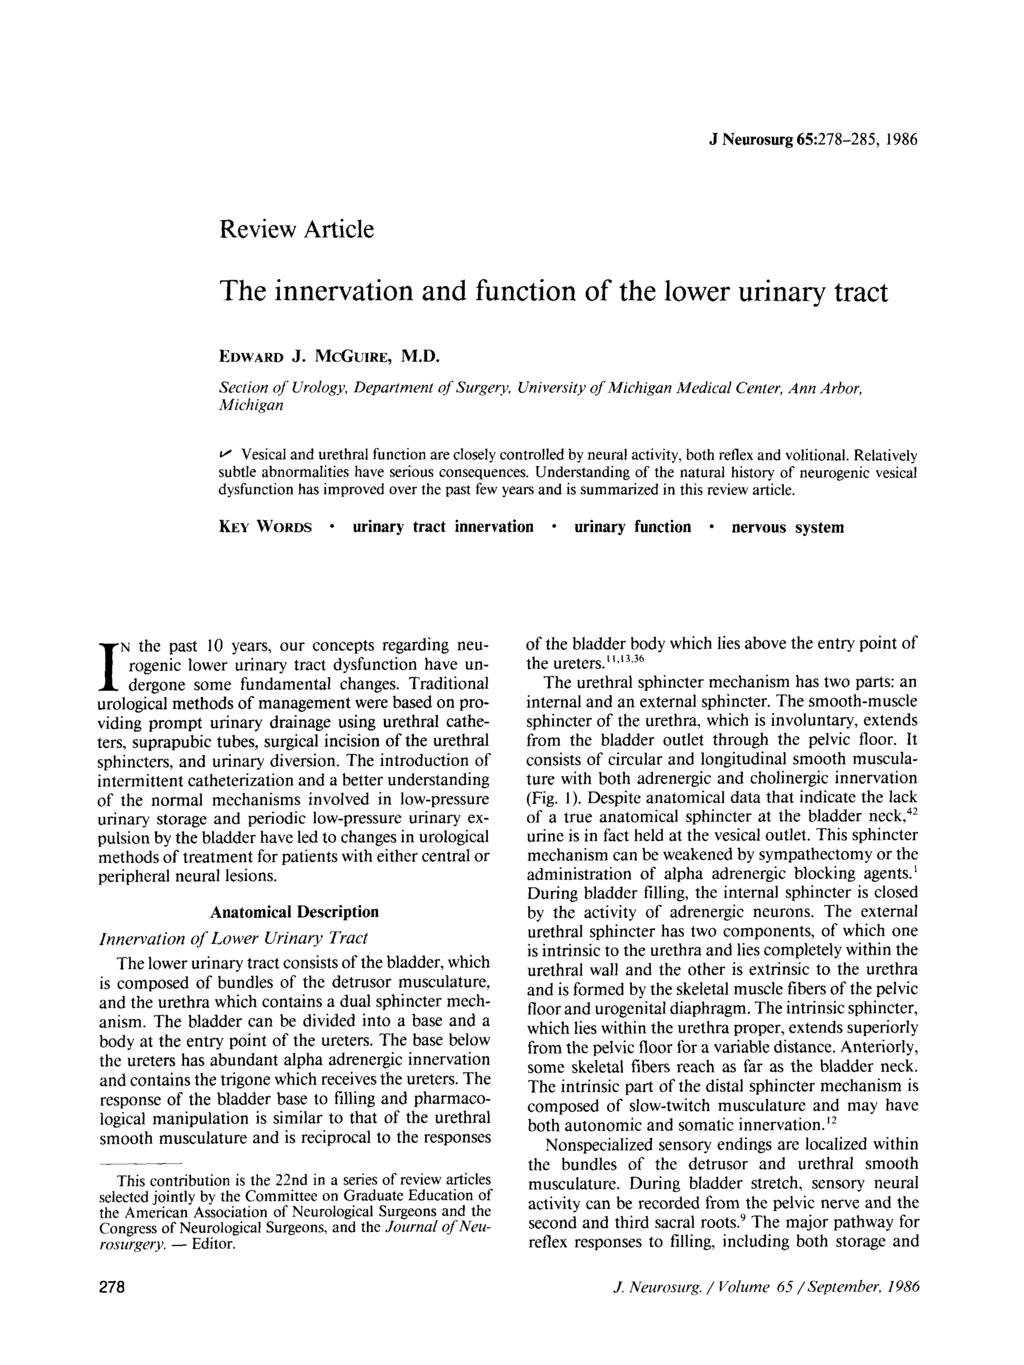 J Neurosurg 65:278-285, 1986 Review Article The innervation and function of the lower urinary tract EDW